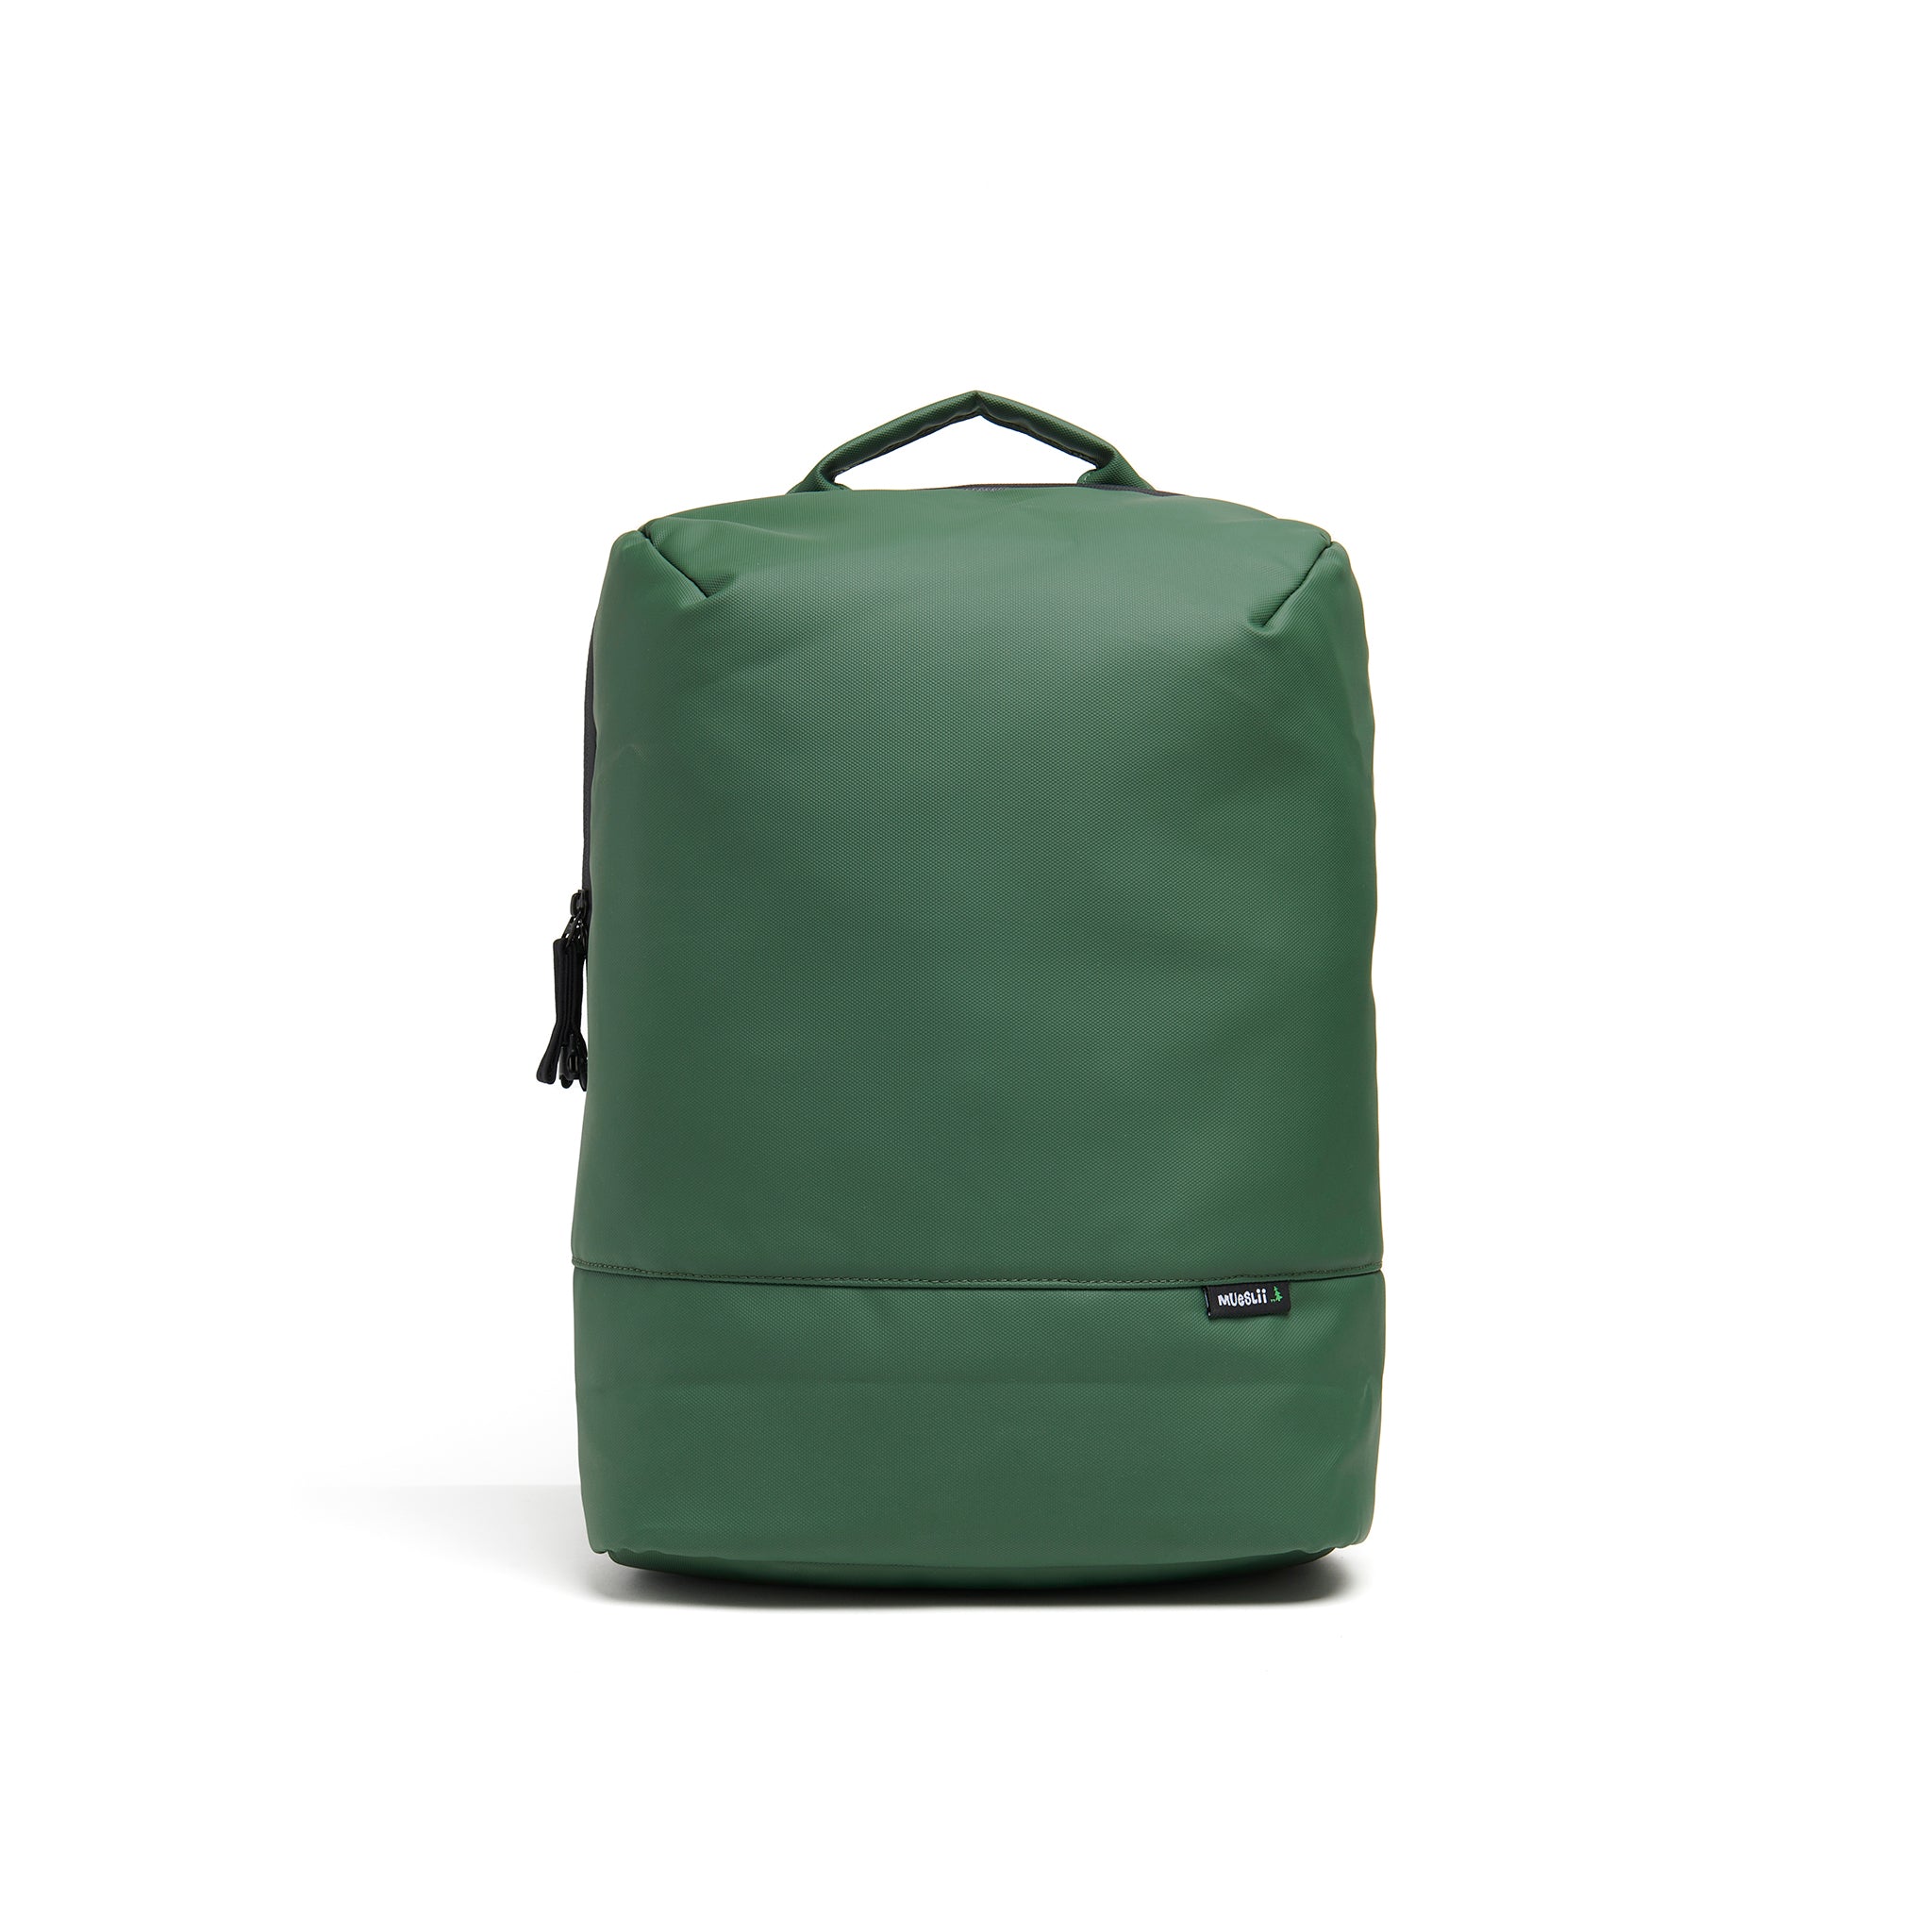 Mueslii travel backpack, made of PU coated waterproof nylon, with a laptop compartment, color olive green, front view.